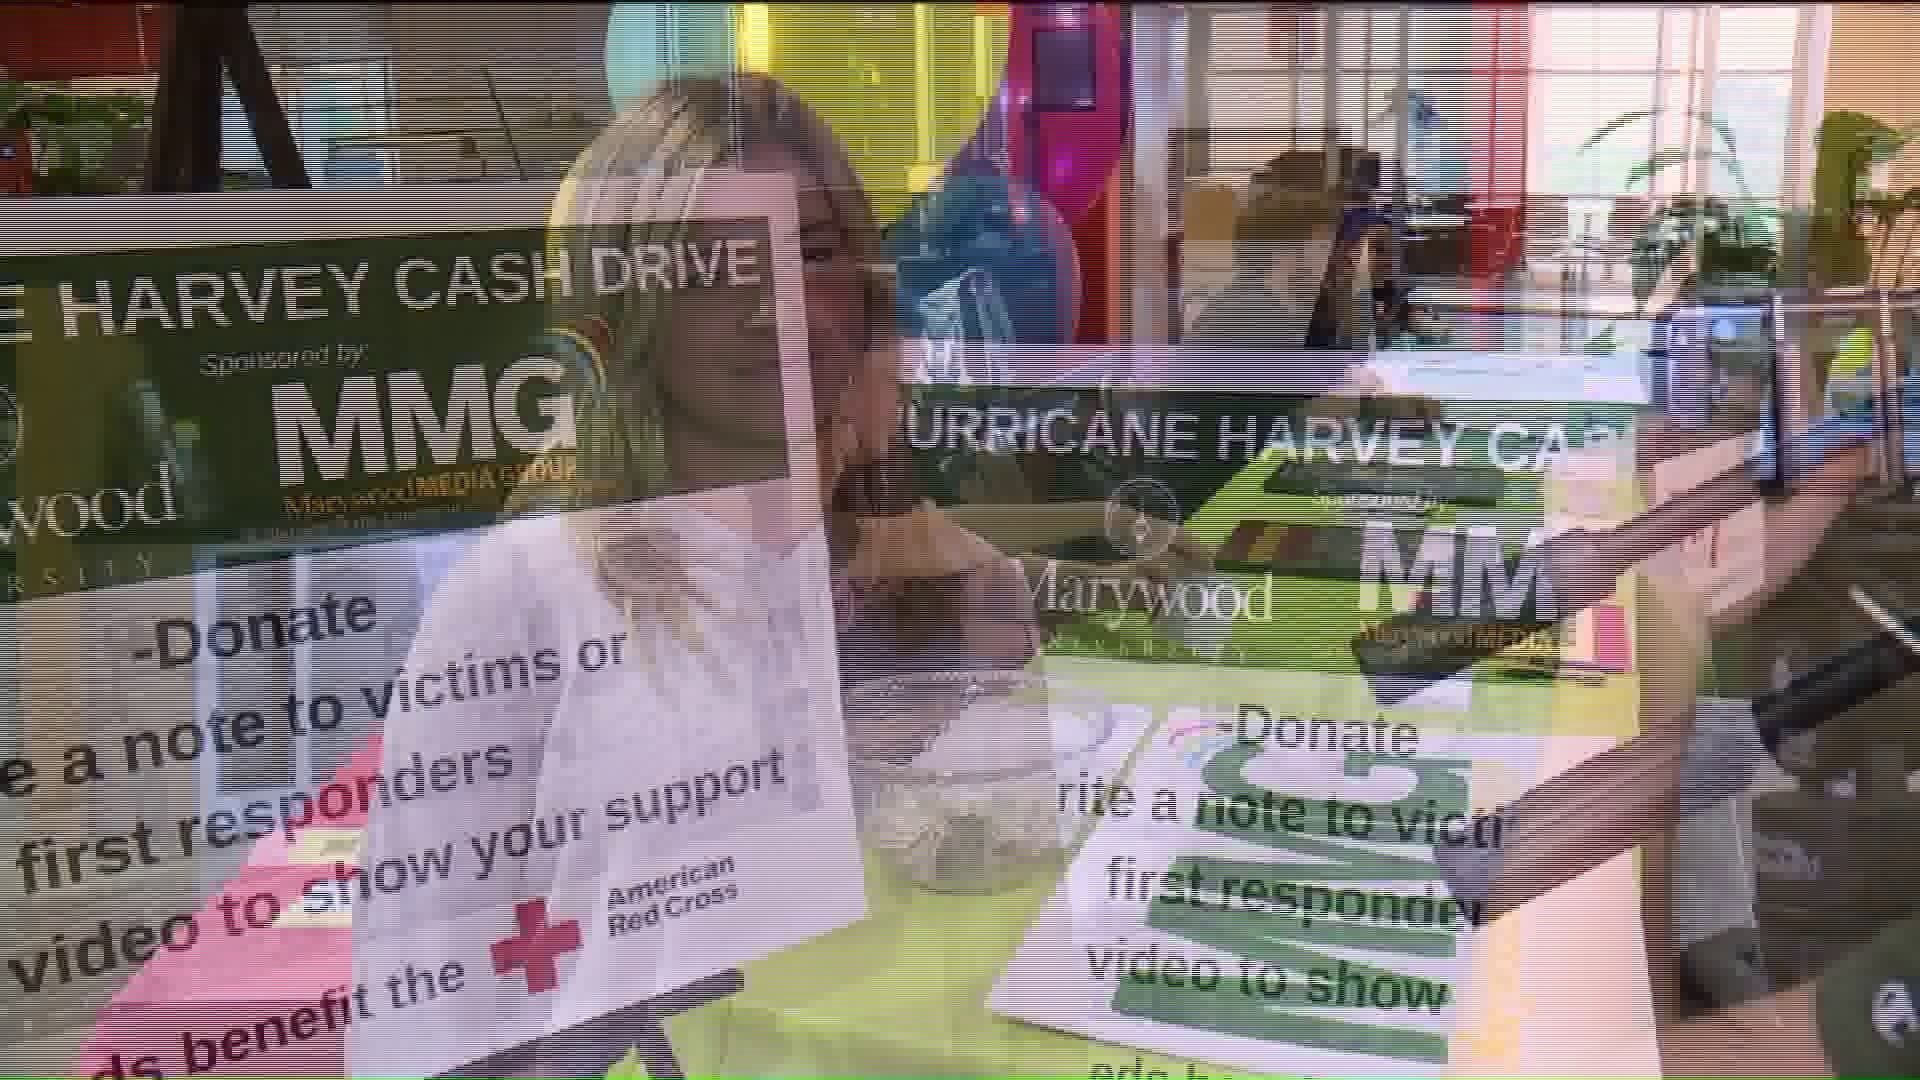 Marywood University Students Hold Fundraising Campaign to Help Those Affected by Hurricane Harvey